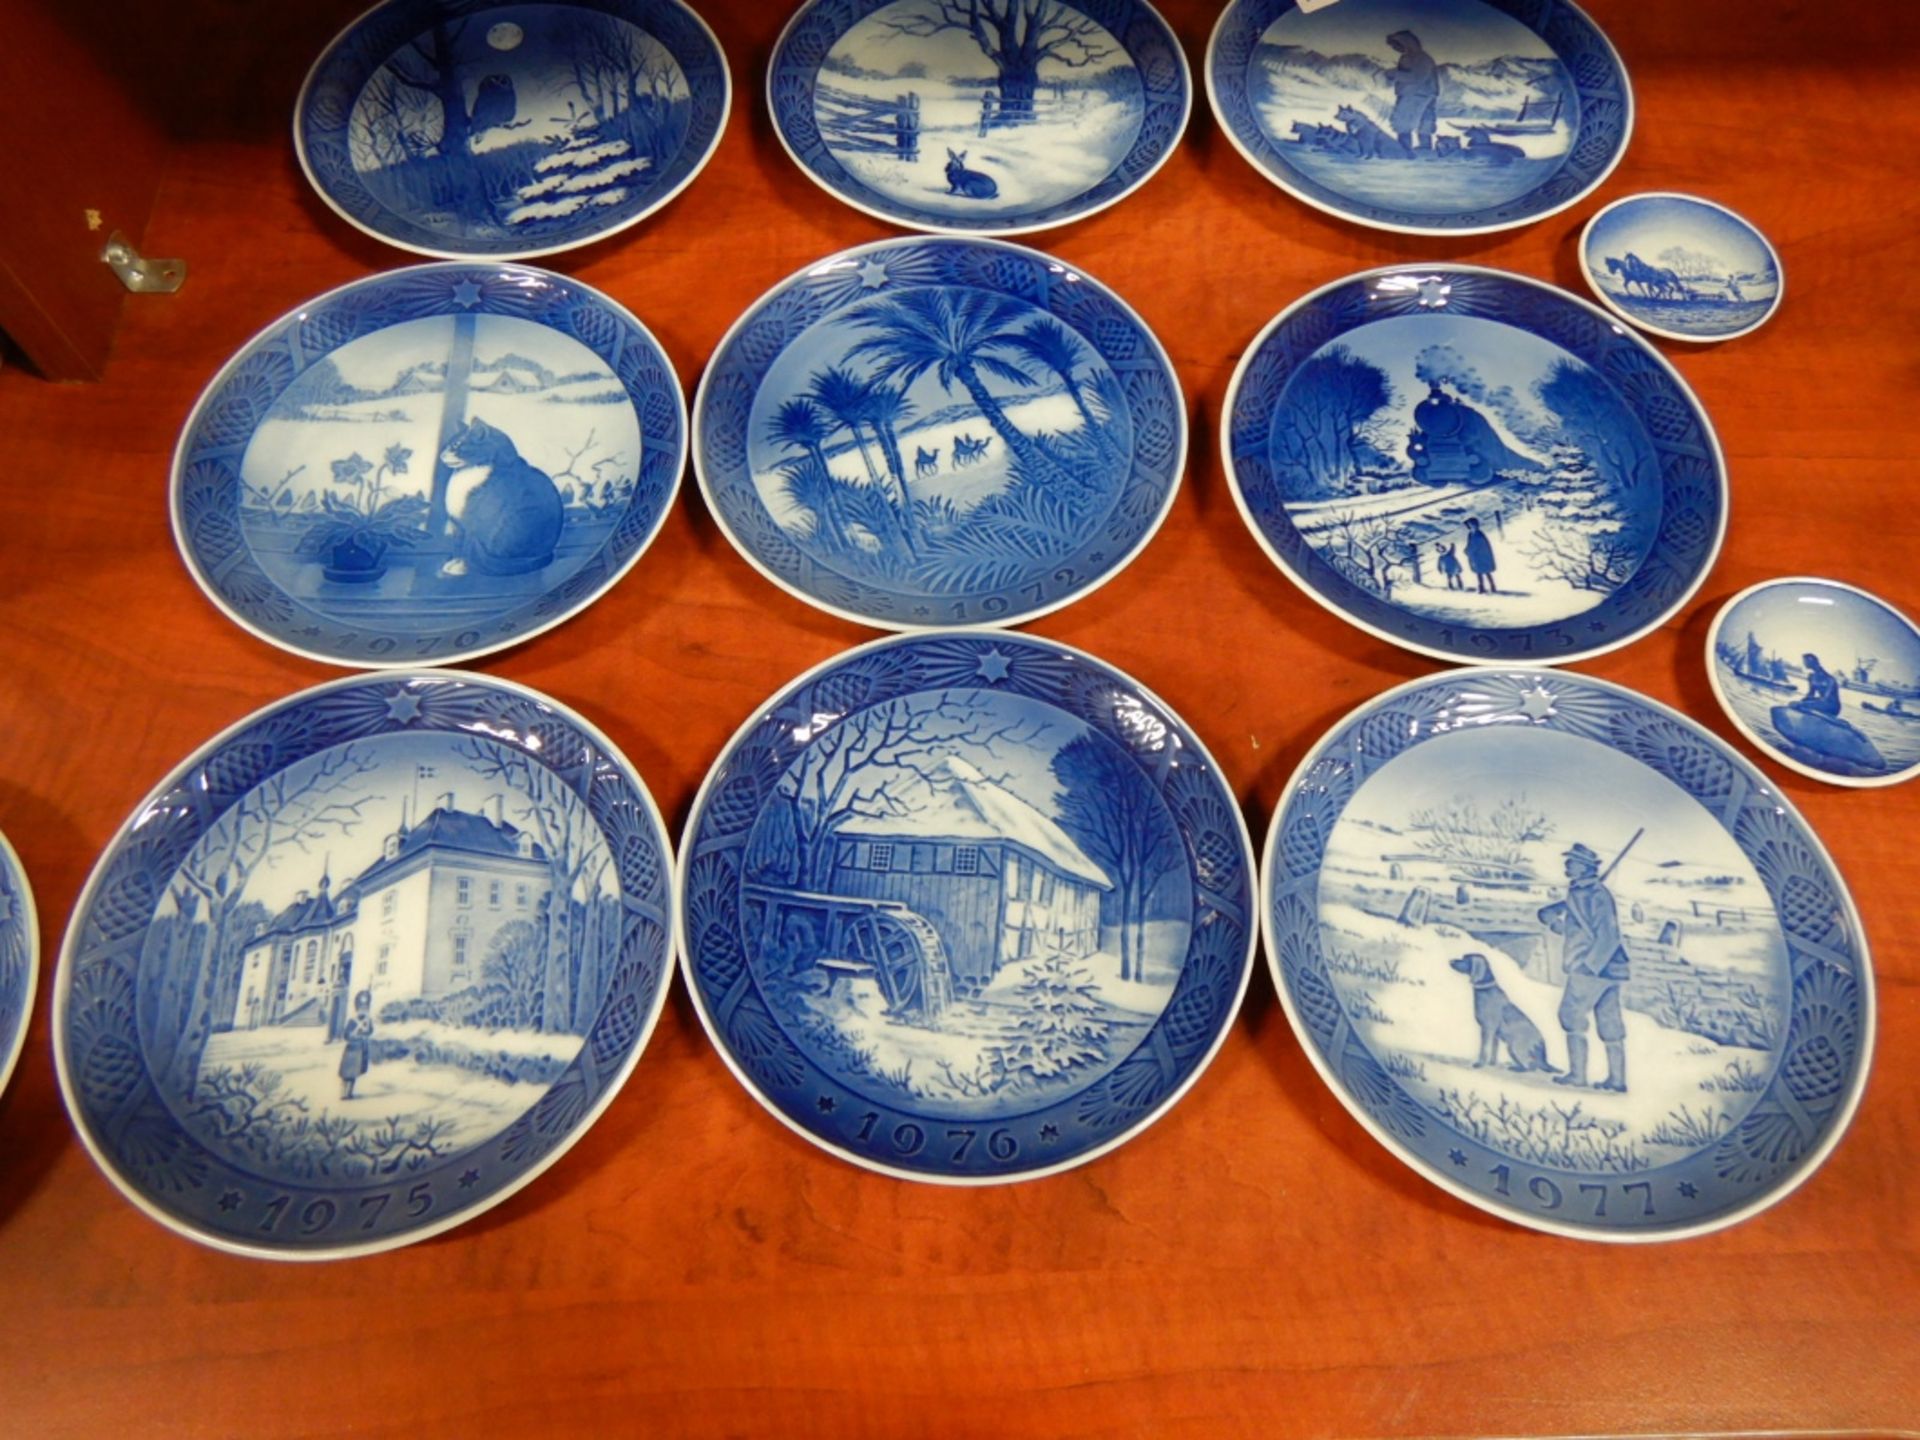 L/O ROYAL COPENHAGEN "GREENLAND SCENERY" COLLECTOR PLATES 1969-1979, 1-VIEWS OF WINNEPEG CHINA - Image 4 of 6